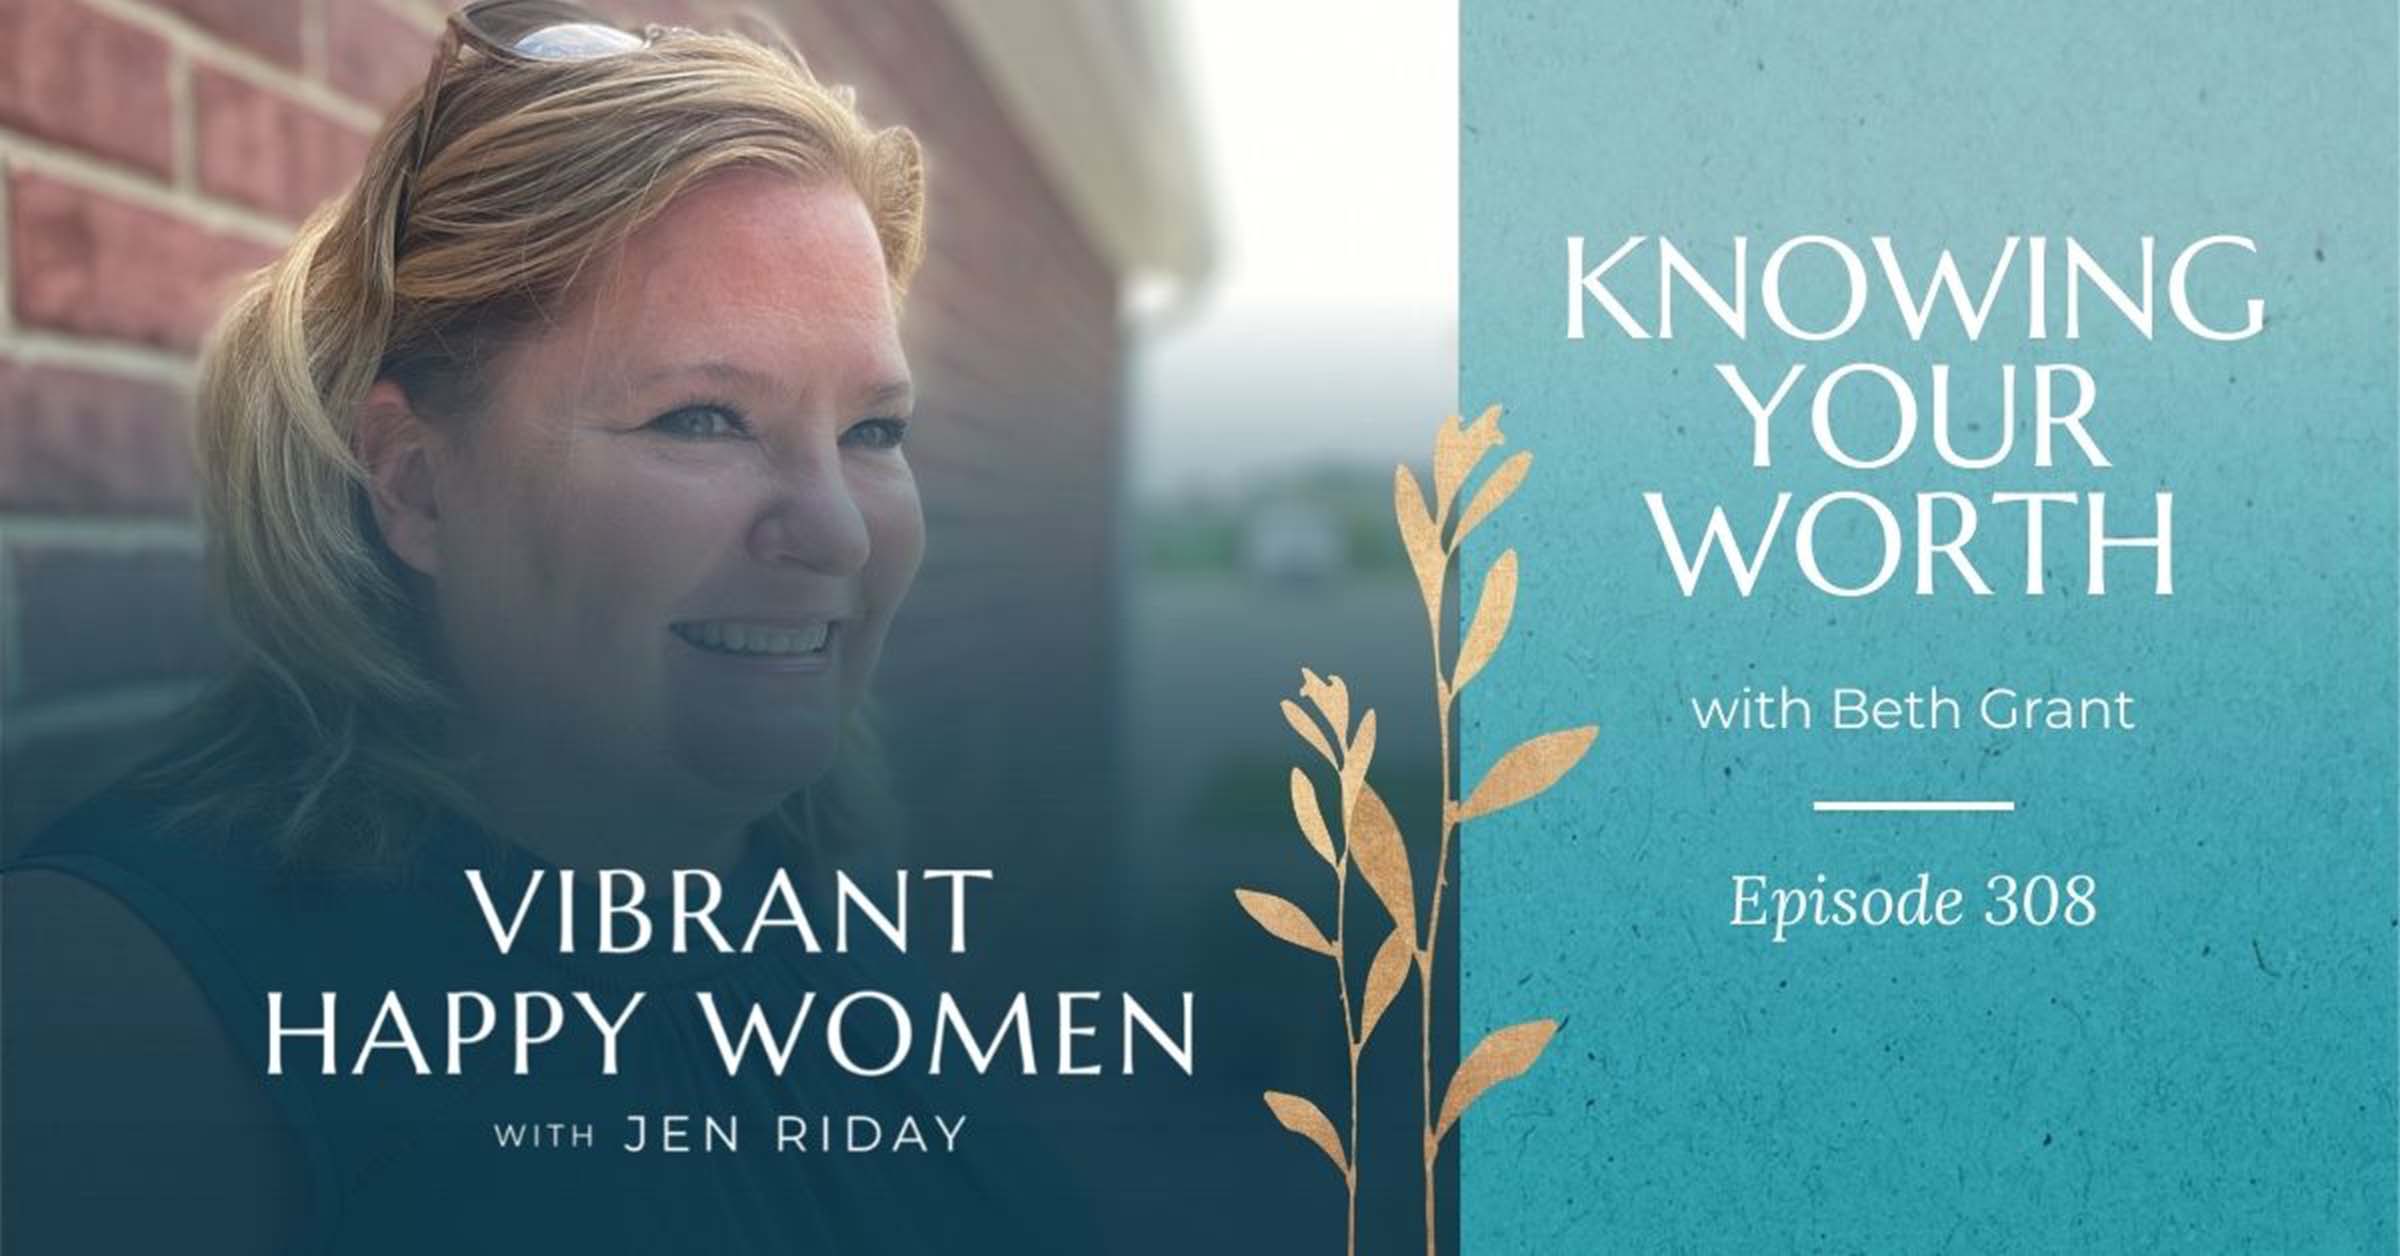 Vibrant Happy Women with Dr. Jen Riday | Knowing Your Worth (with Beth Grant)